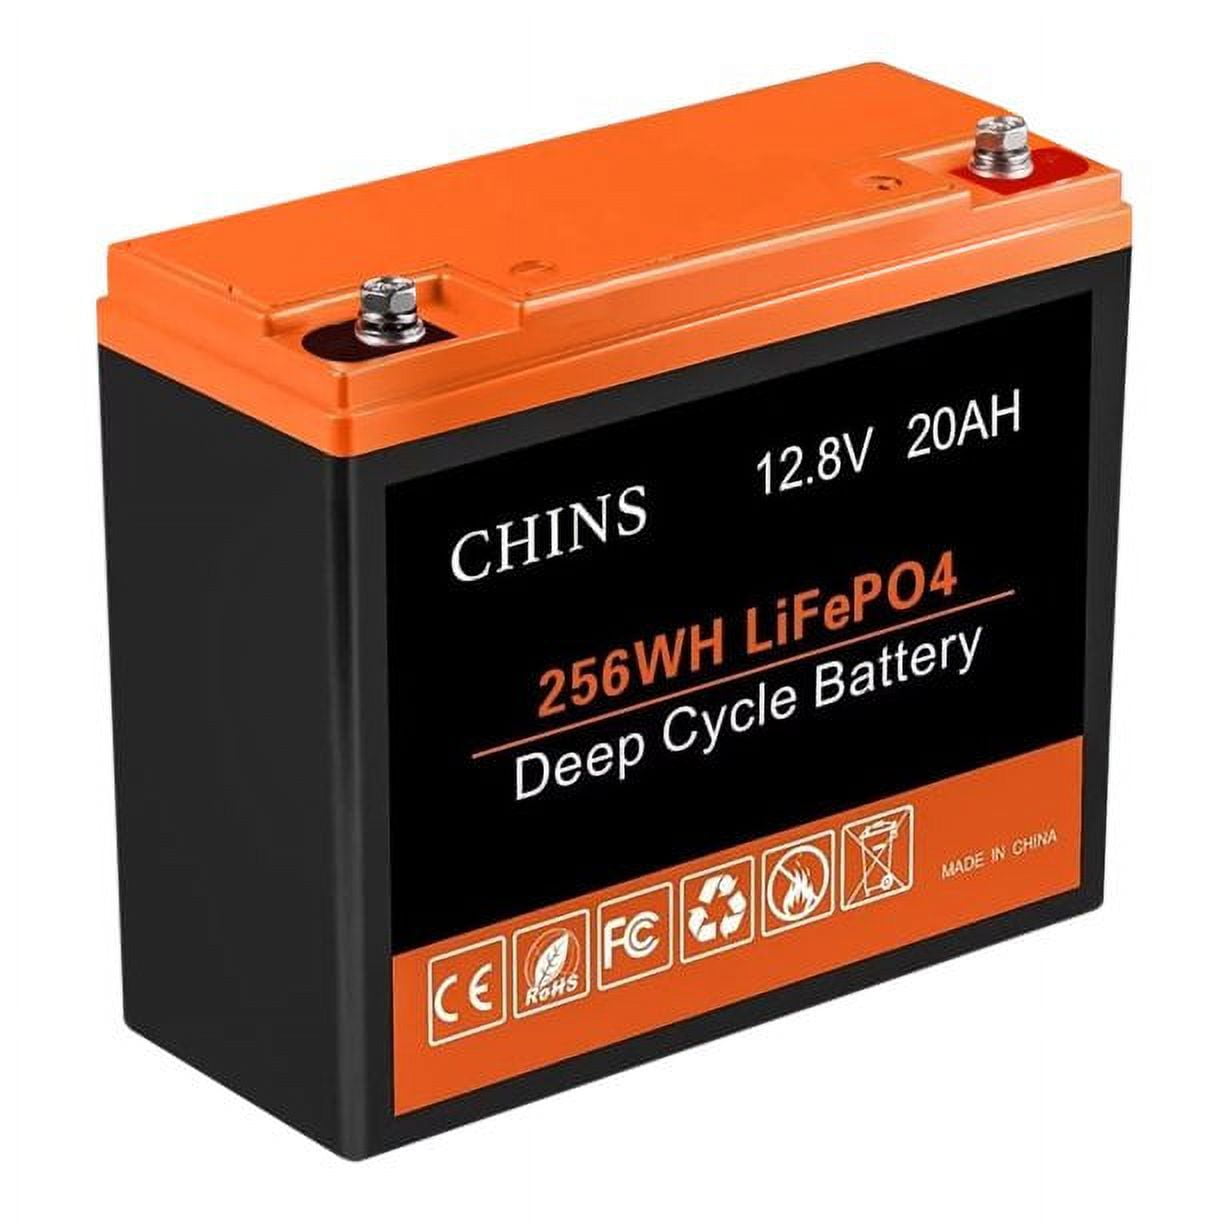 New 12V 12Ah LiFePO4 Battery Pack Lithium Iron Phosphate Solar Batteries  Grade A Cells Built-in BMS For Kids Electric Cars Toy - AliExpress